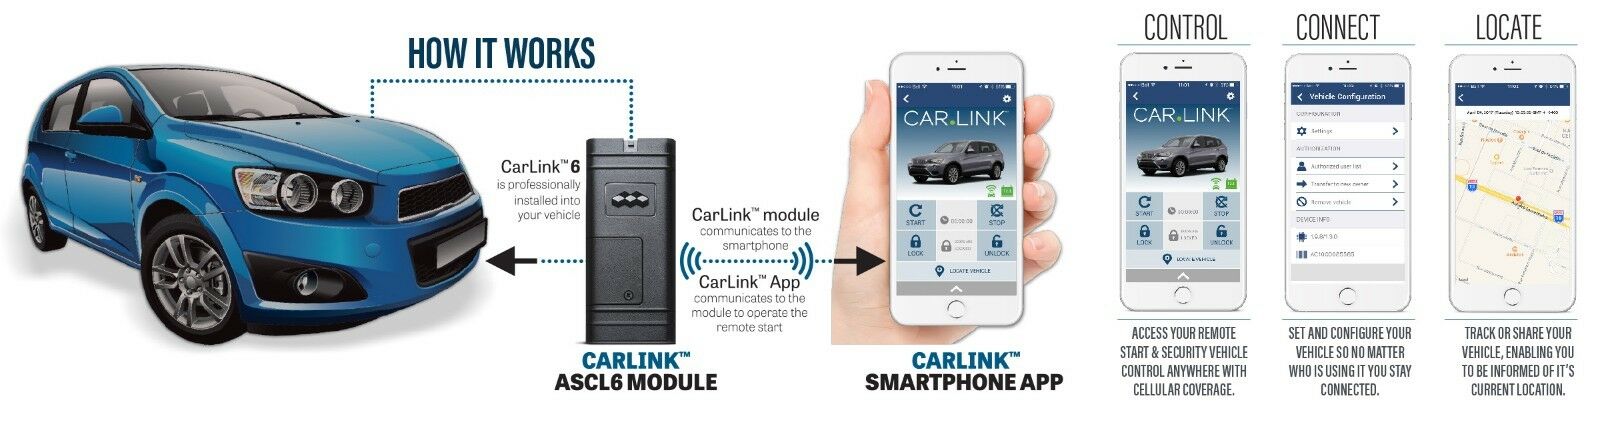 carlink mobile app for starting your vehicle from your phone